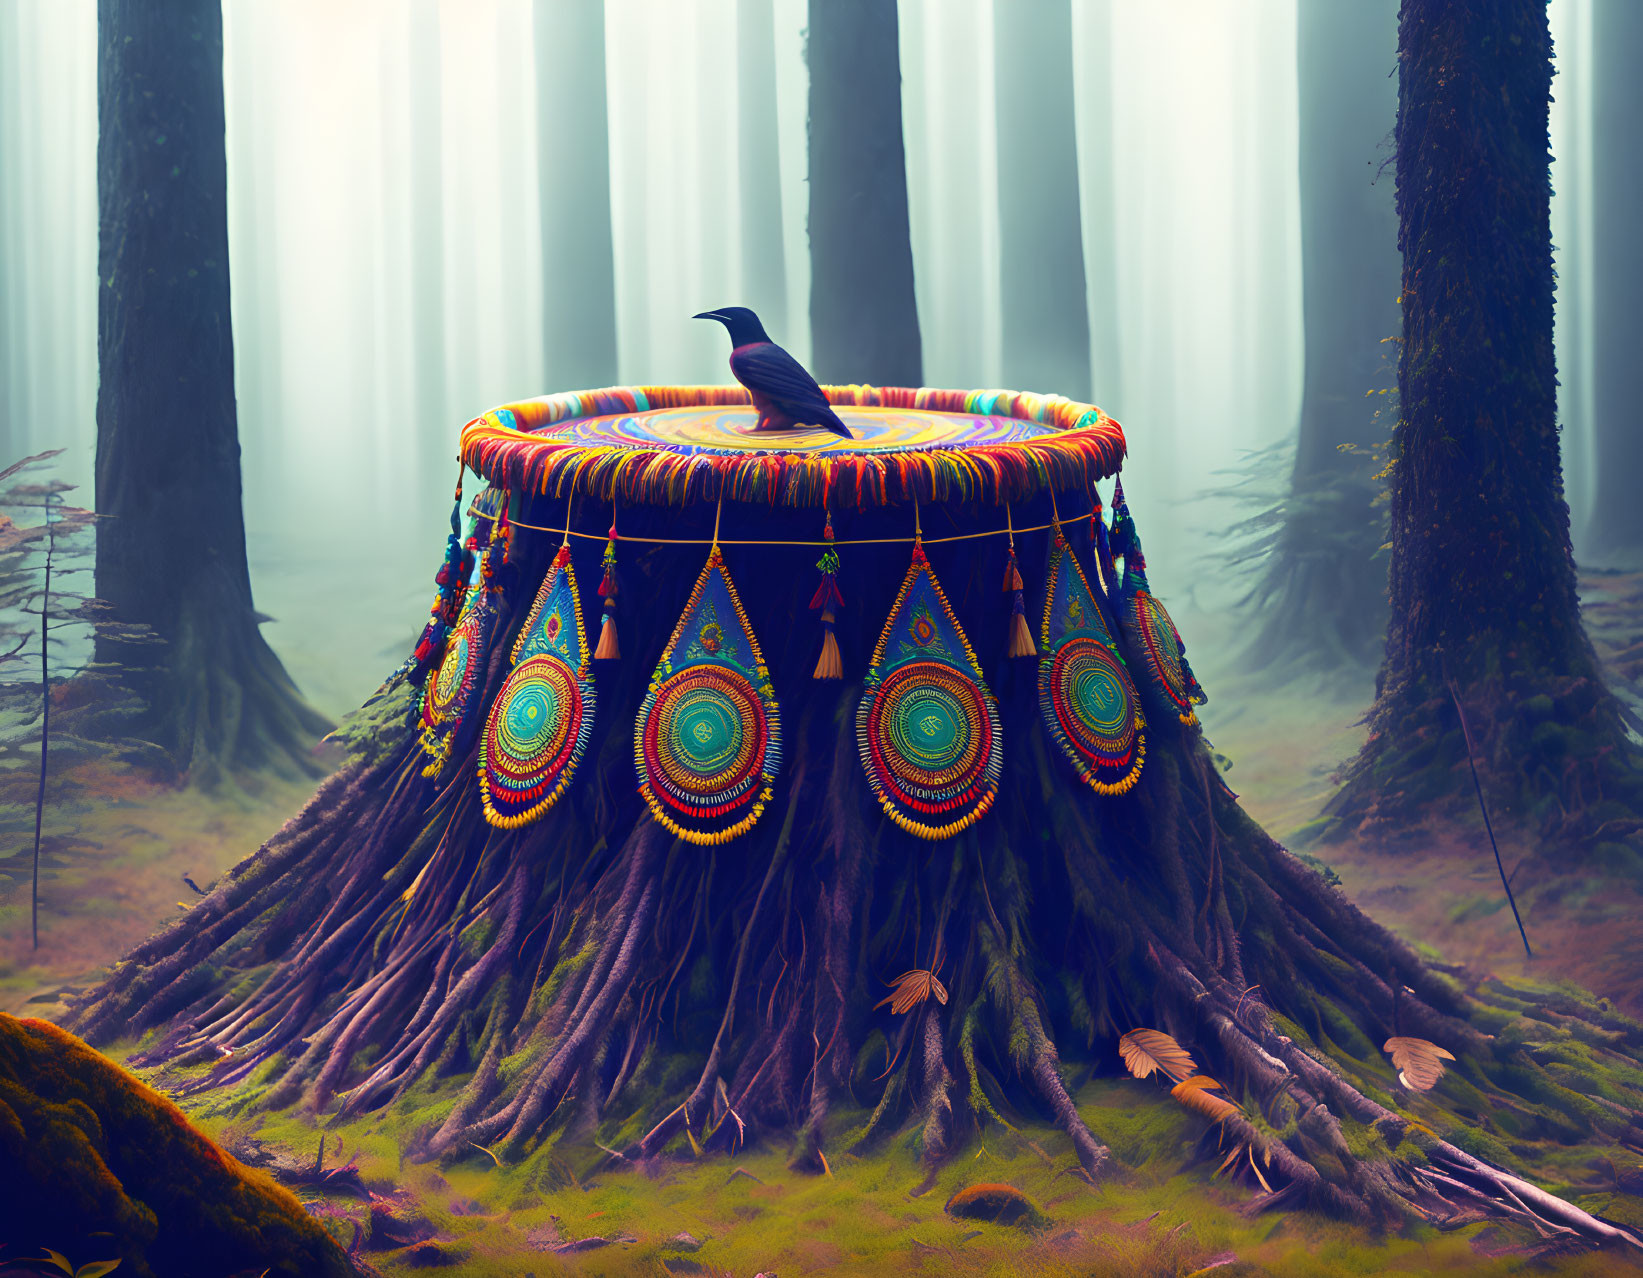 Vibrant cloth over tree stump with crow in misty forest